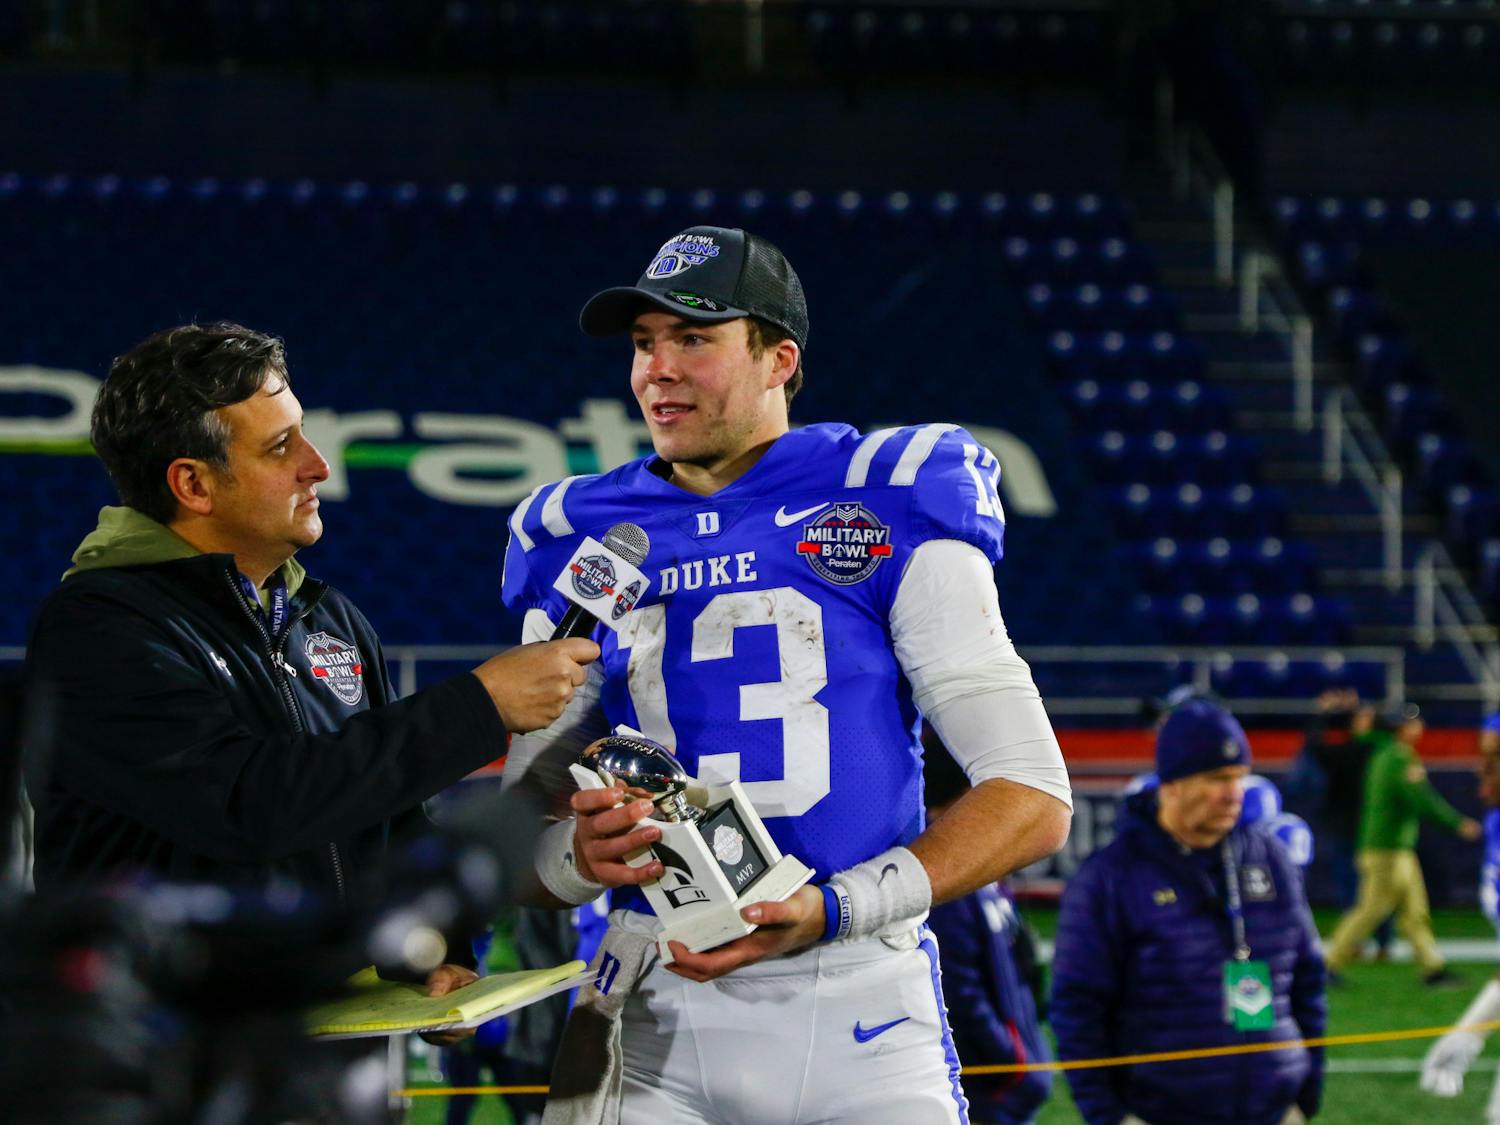 Riley Leonard accepts Military Bowl MVP honors after leading Duke to victory over UCF.